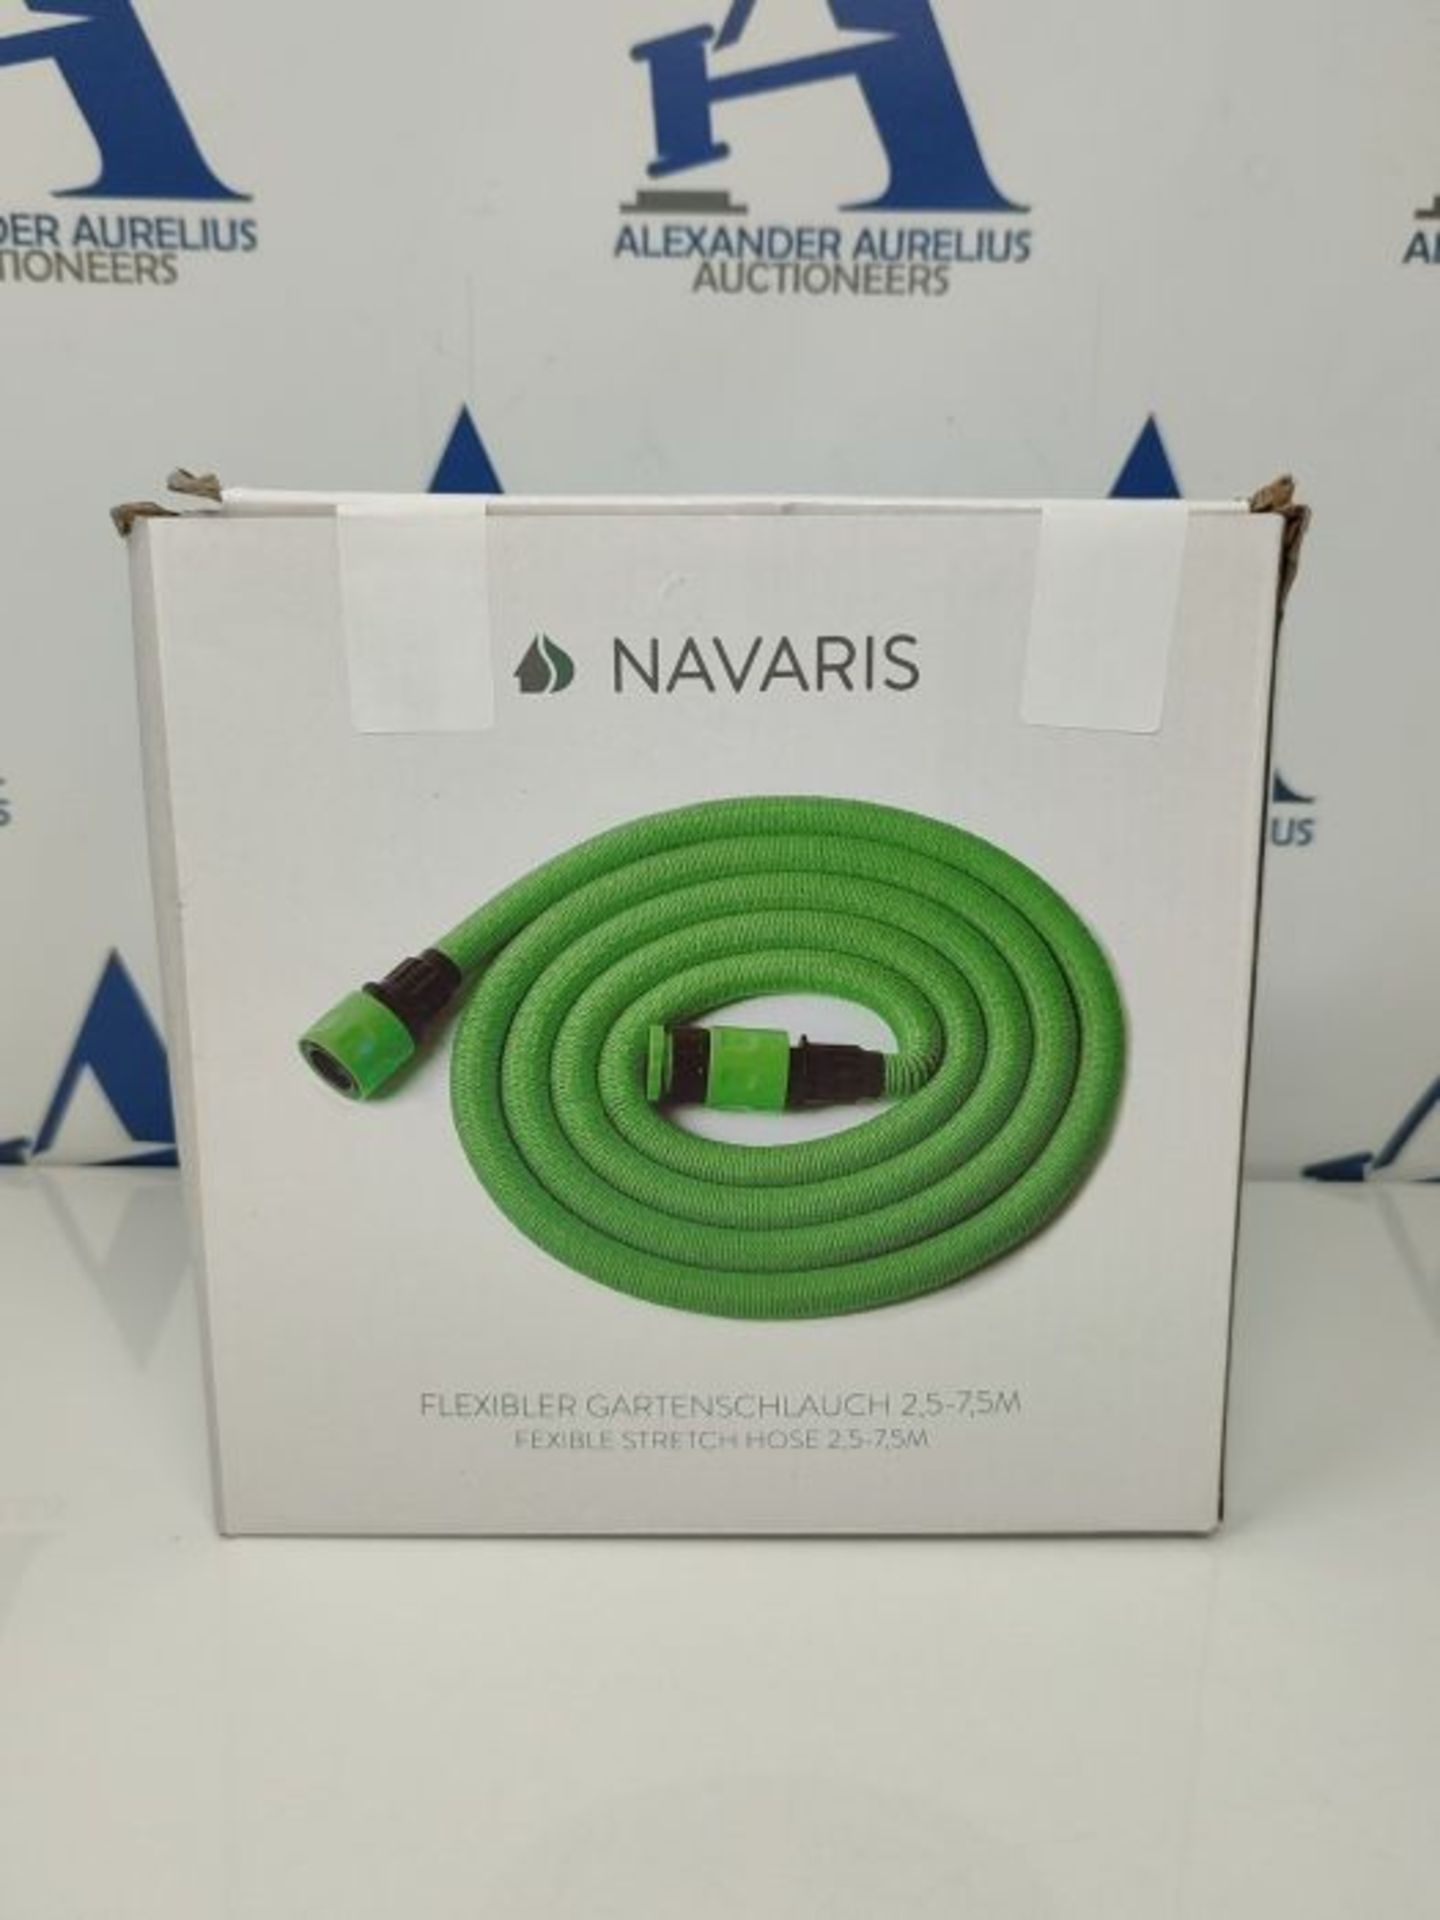 Navaris 7.5m Expandable Garden Hose - Flexible Water Pipe with Double Latex Core, 7 Pa - Image 2 of 3